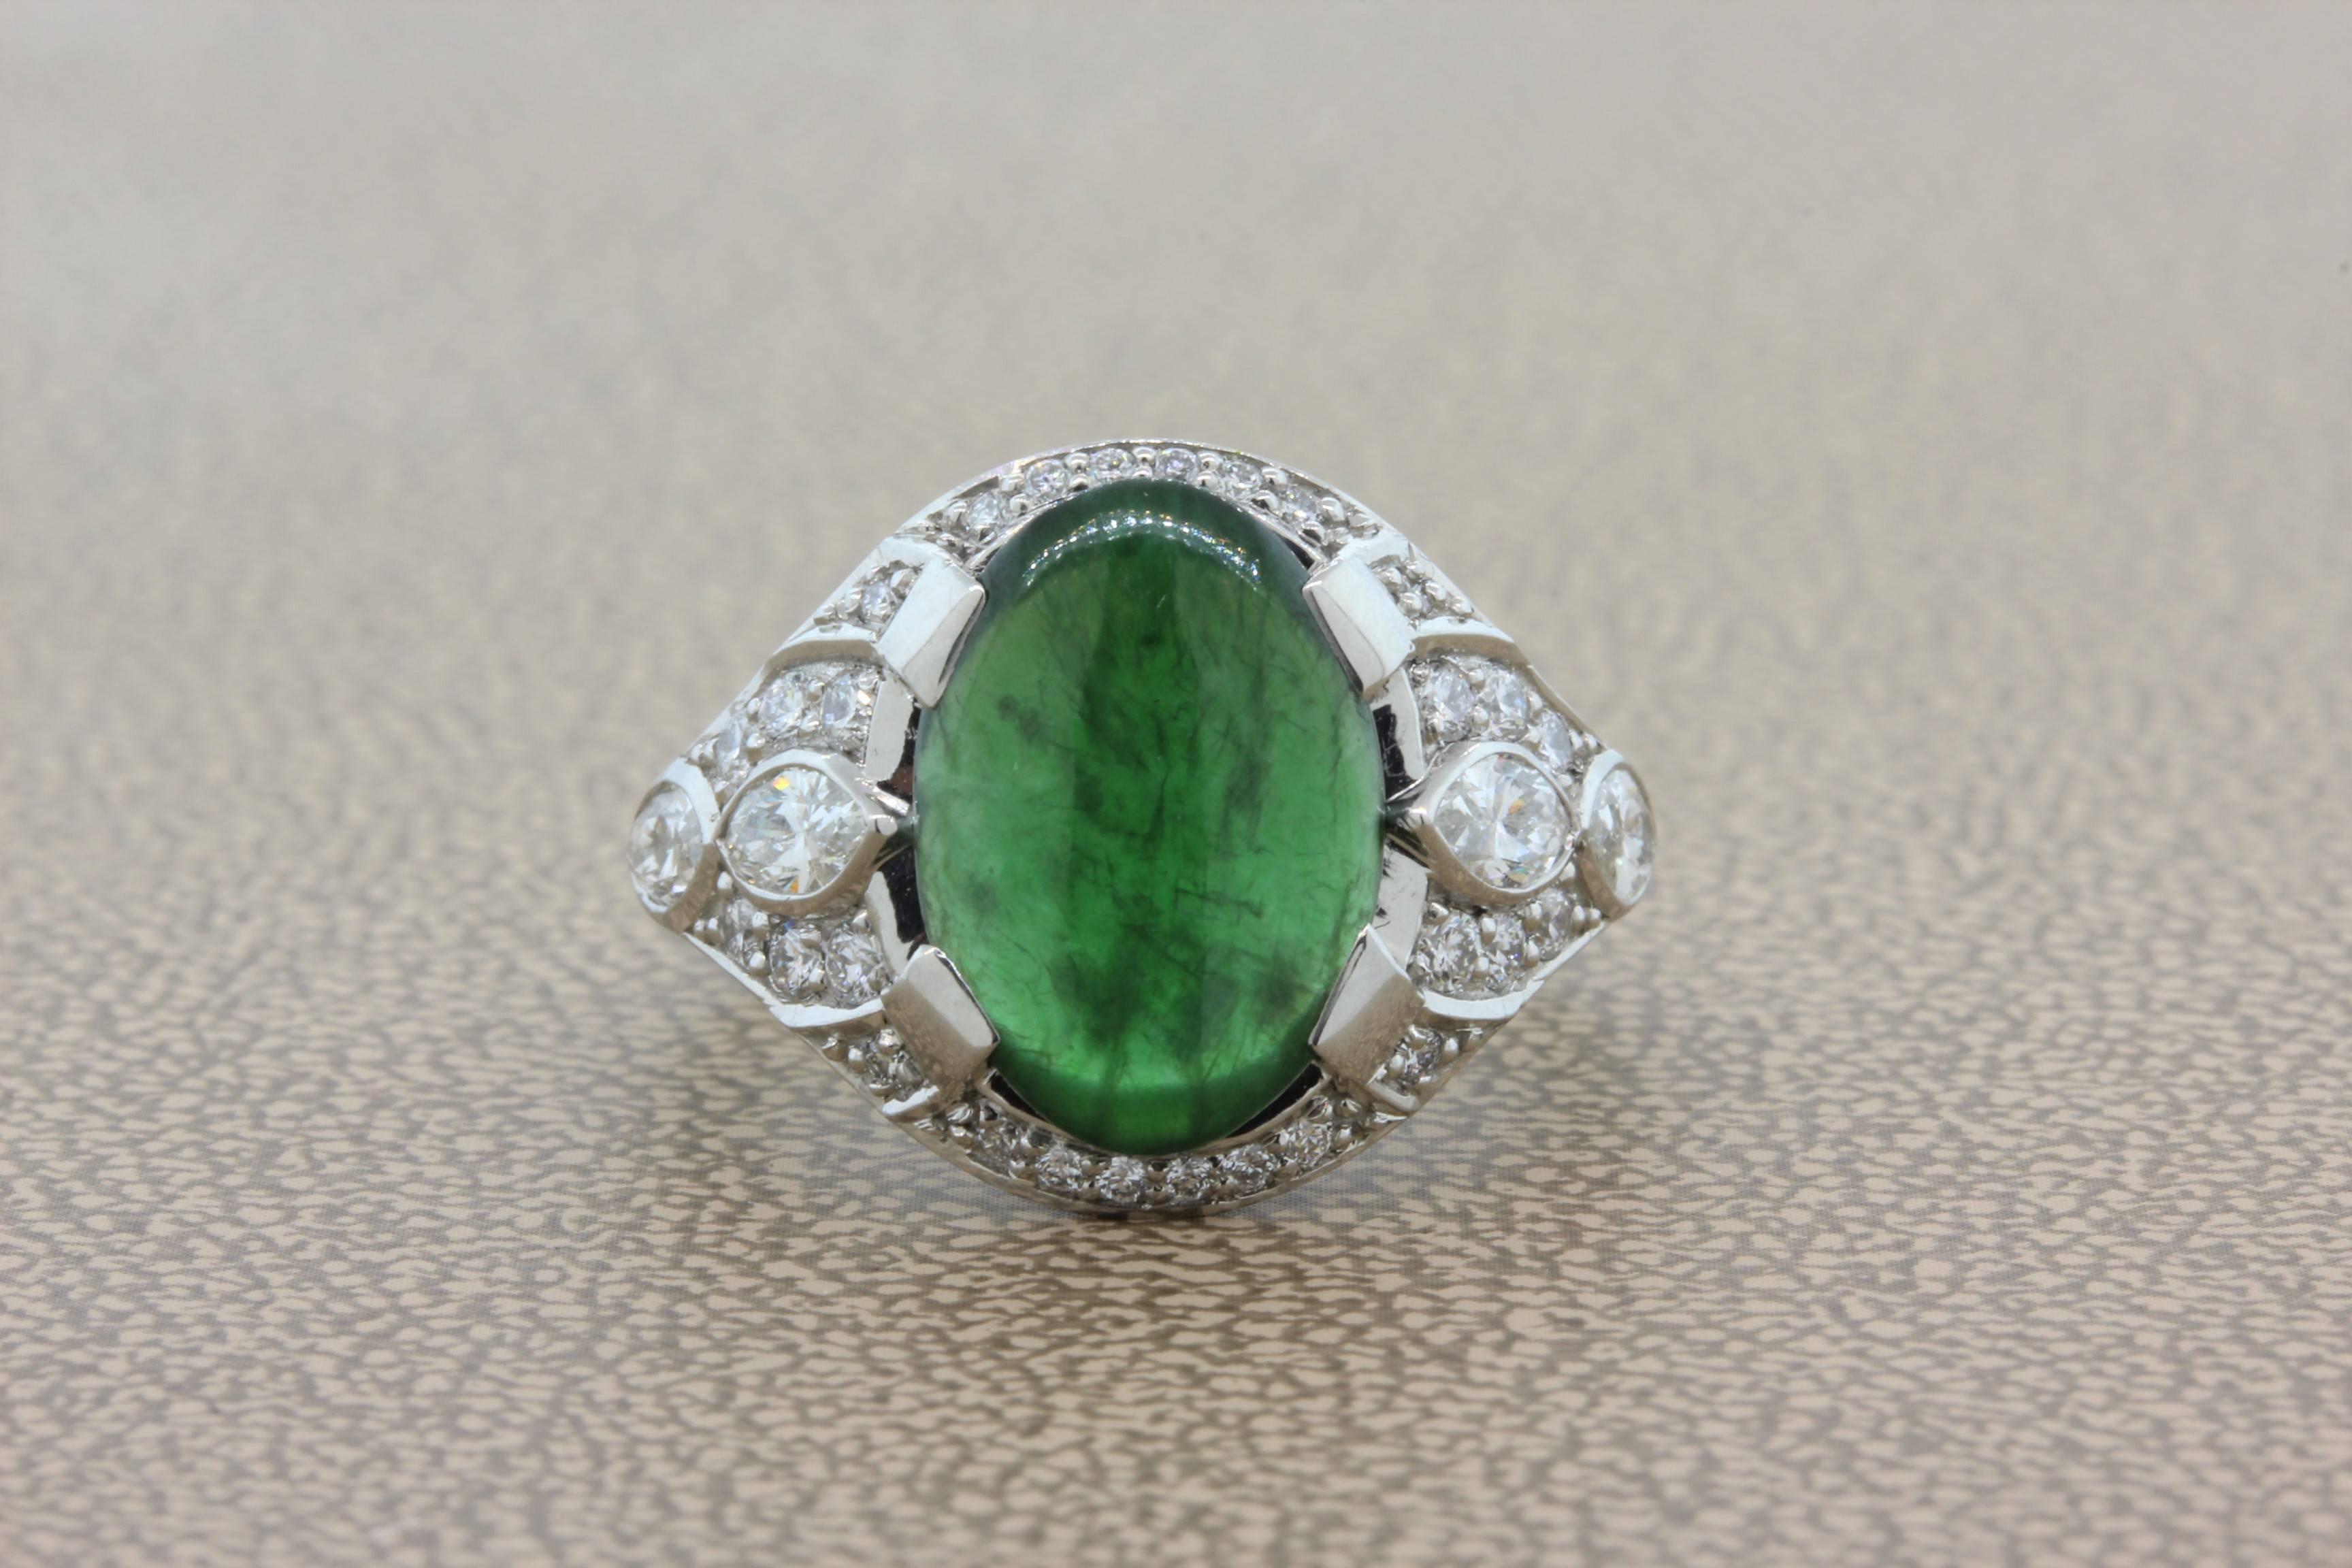 An antique inspired ring featuring fine natural jadeite jade set in a handmade platinum mounting. There are 0.90 carats of marquise and round cut diamonds to accent the jade. 

Size 6 ½ 
